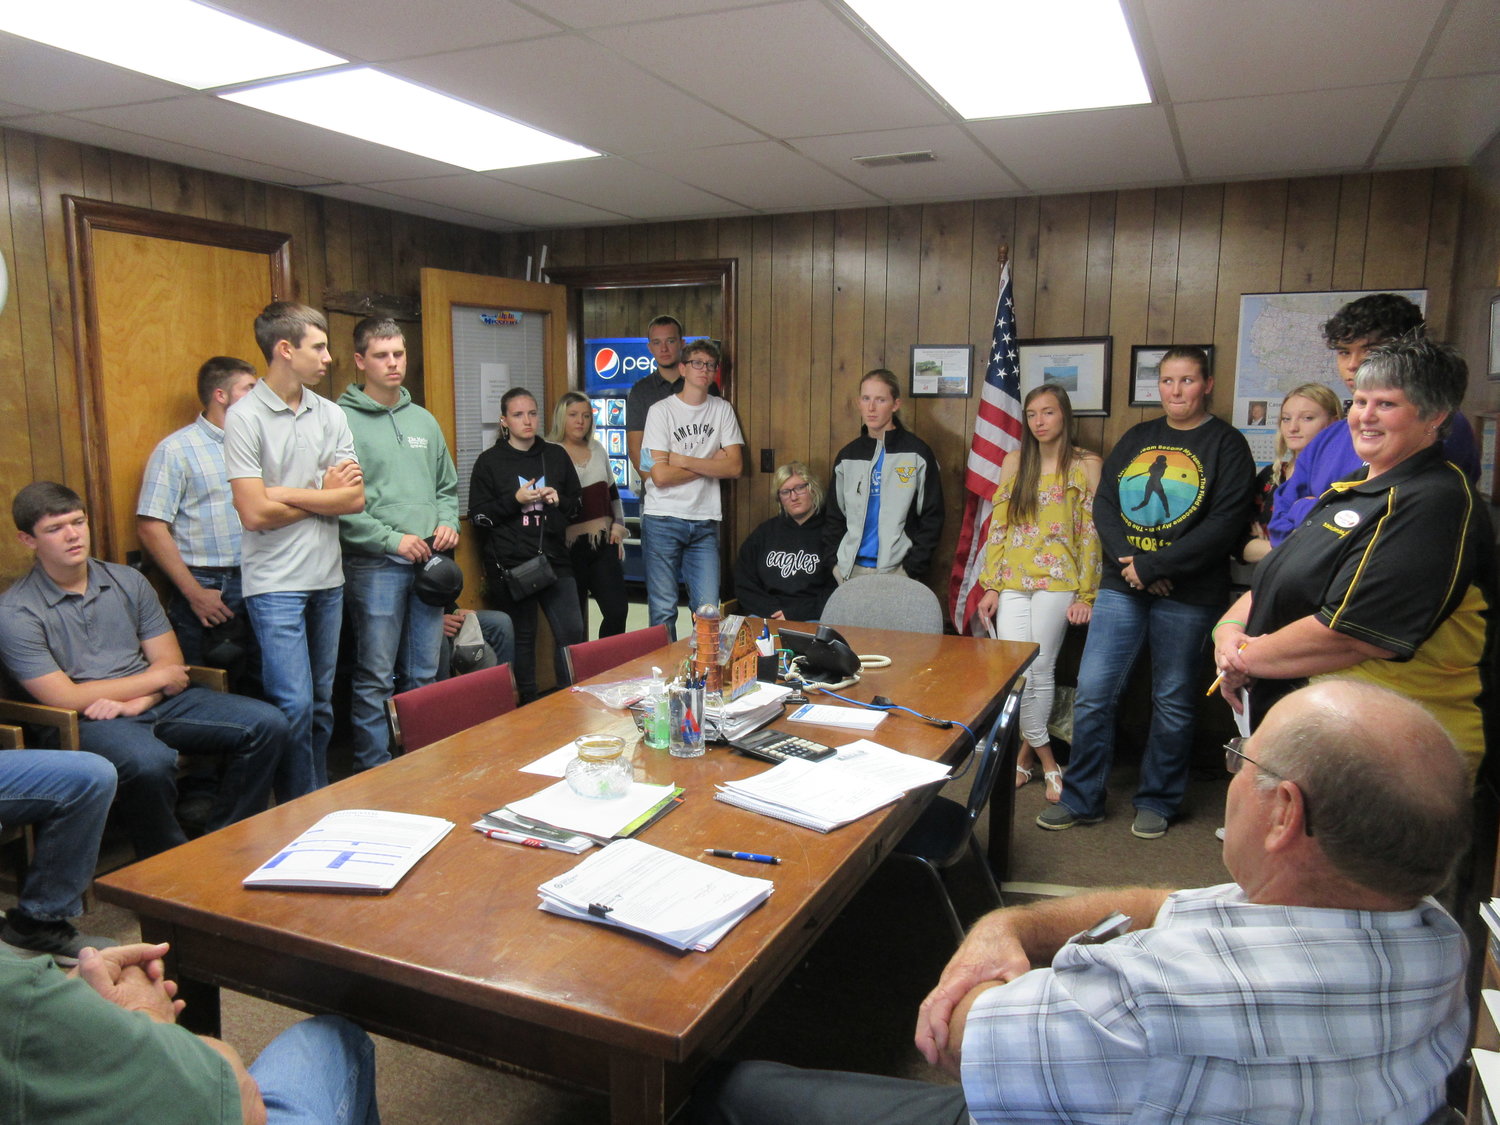 A group of seniors from Vienna High School (left) spent some time at the county commission last Tuesday for Government Day. Brenda Johnson was the adult leader who took them to the different county offices.  Belle High School government students (photo right) were bussed Vienna last week for Government Day sponsored by the Maries County Extension Council. Sara Stratman volunteered to lead the group to the county offices. They are pictured visiting the county commission meeting.